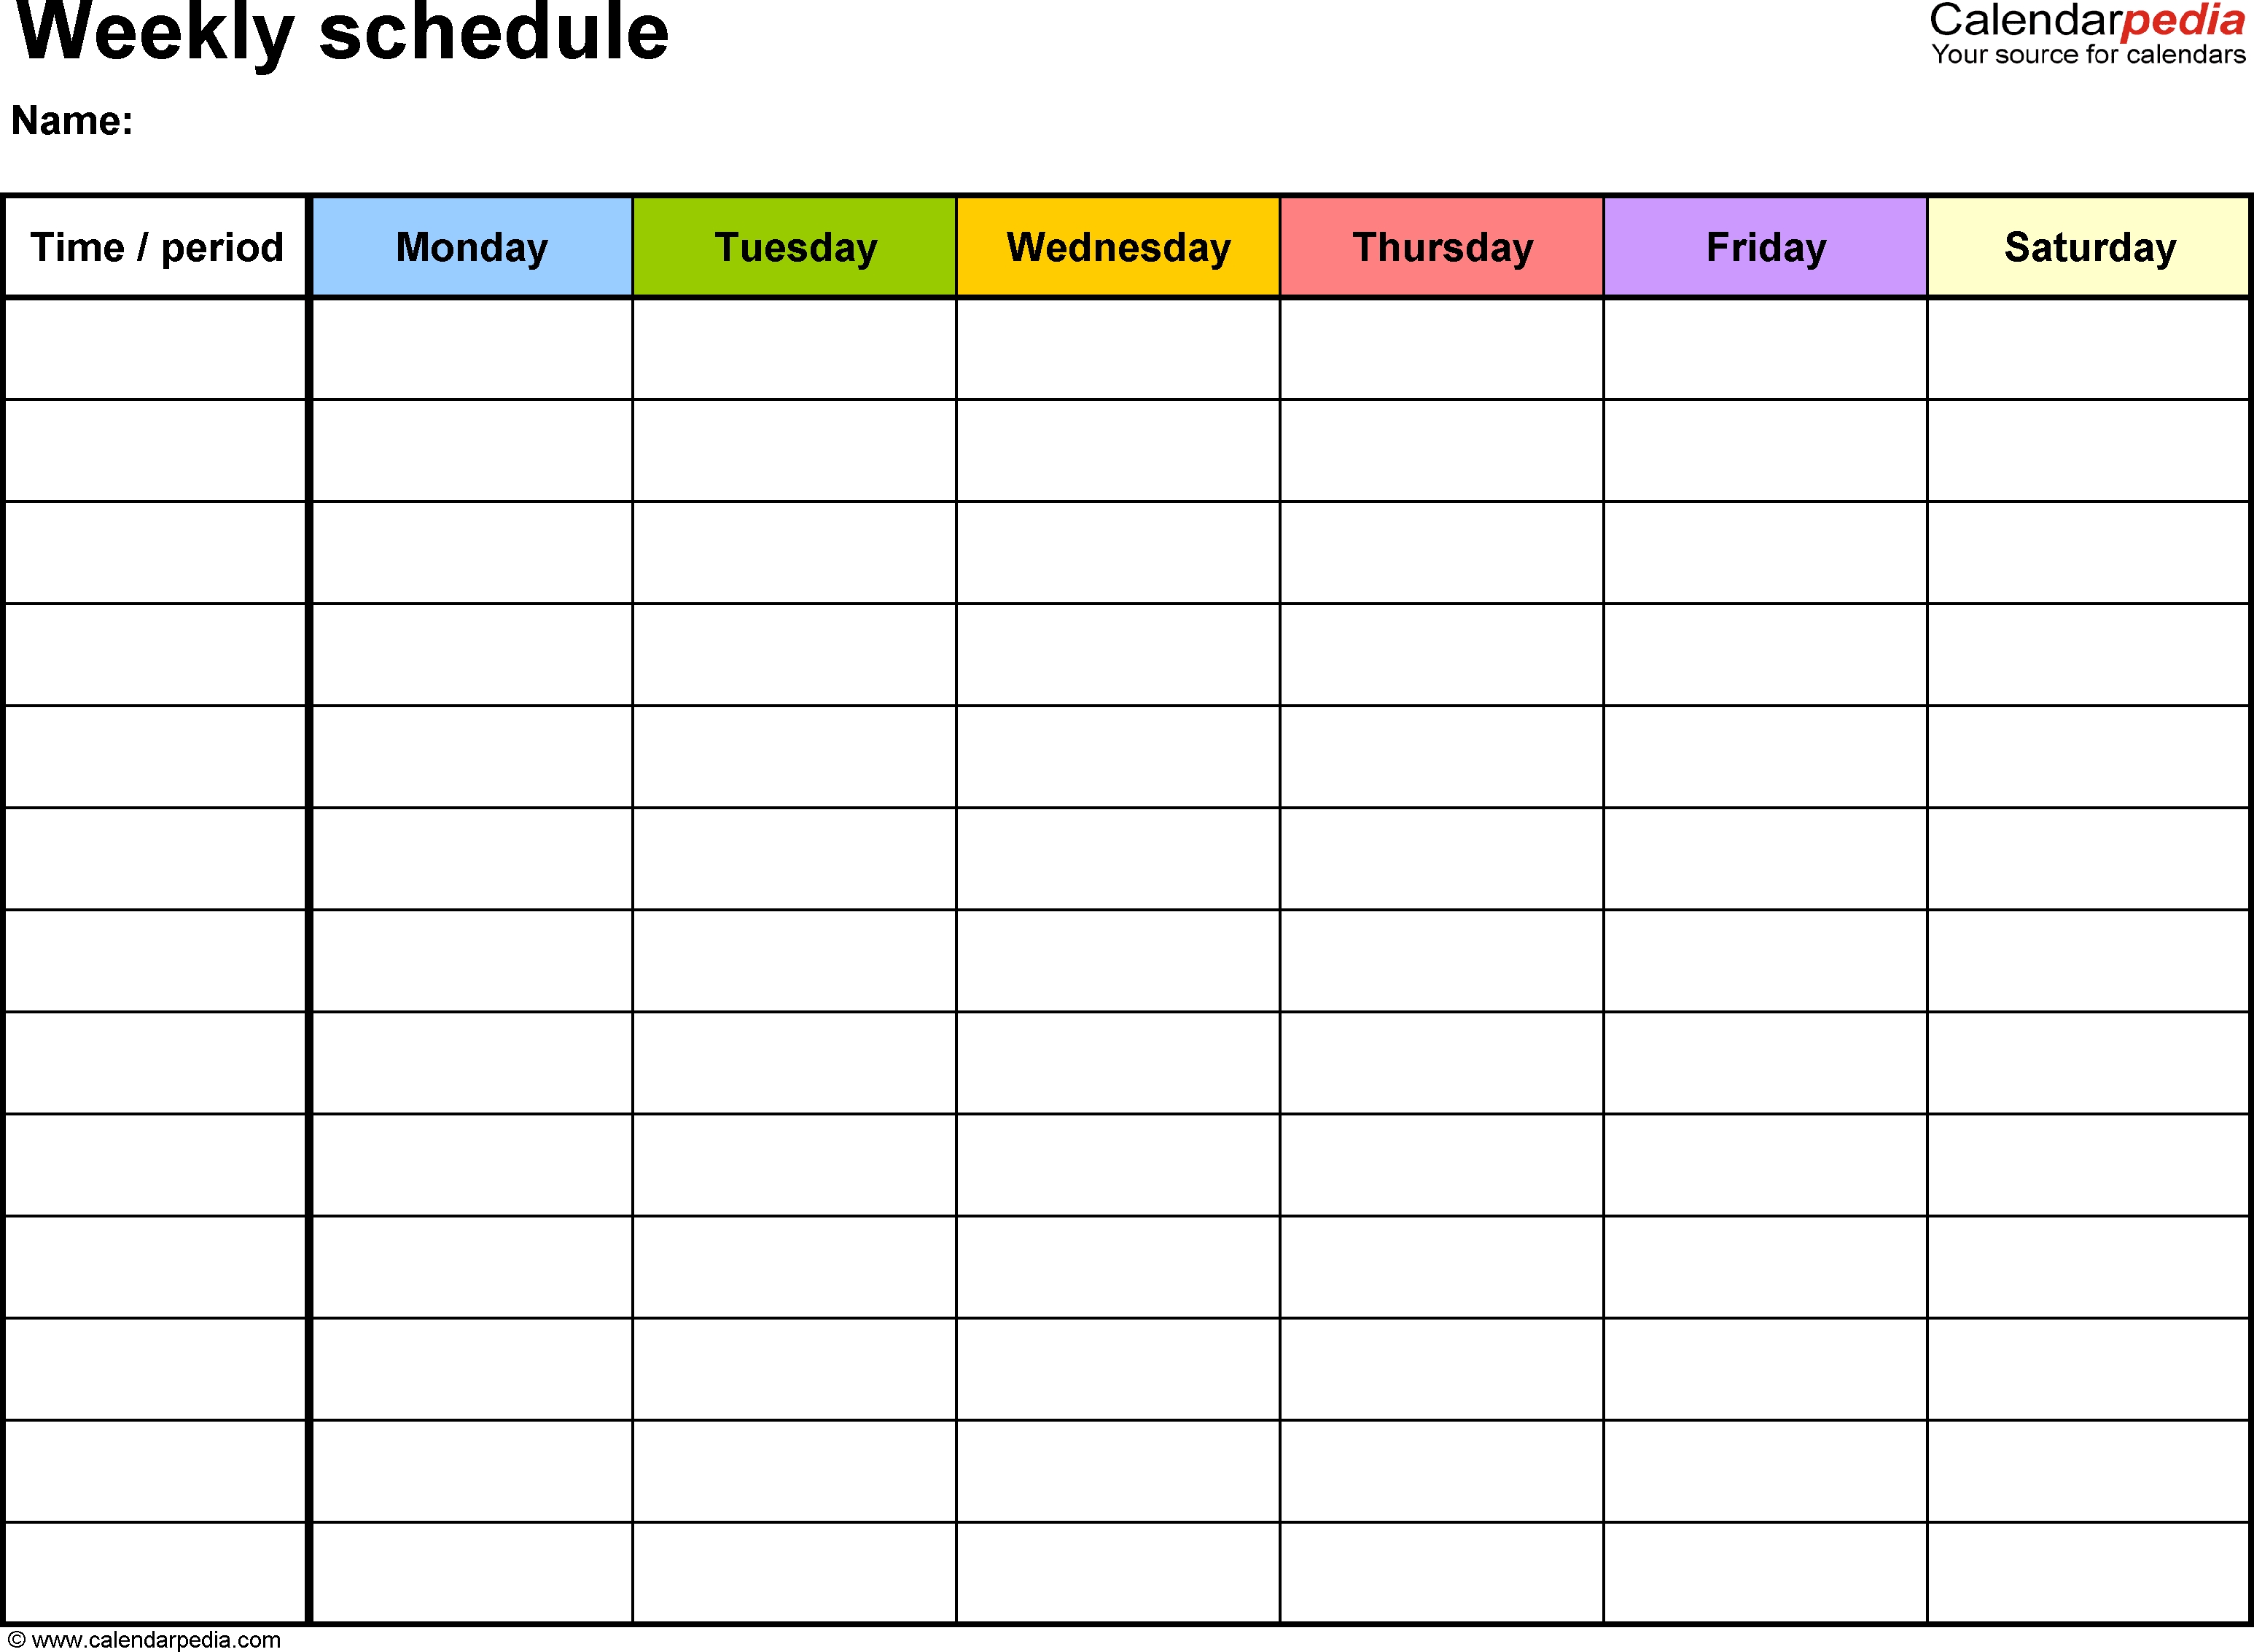 Schedule Template Print Blank Weekly Calendar June Outlook | Smorad within Daily Planner Pull From Outlook